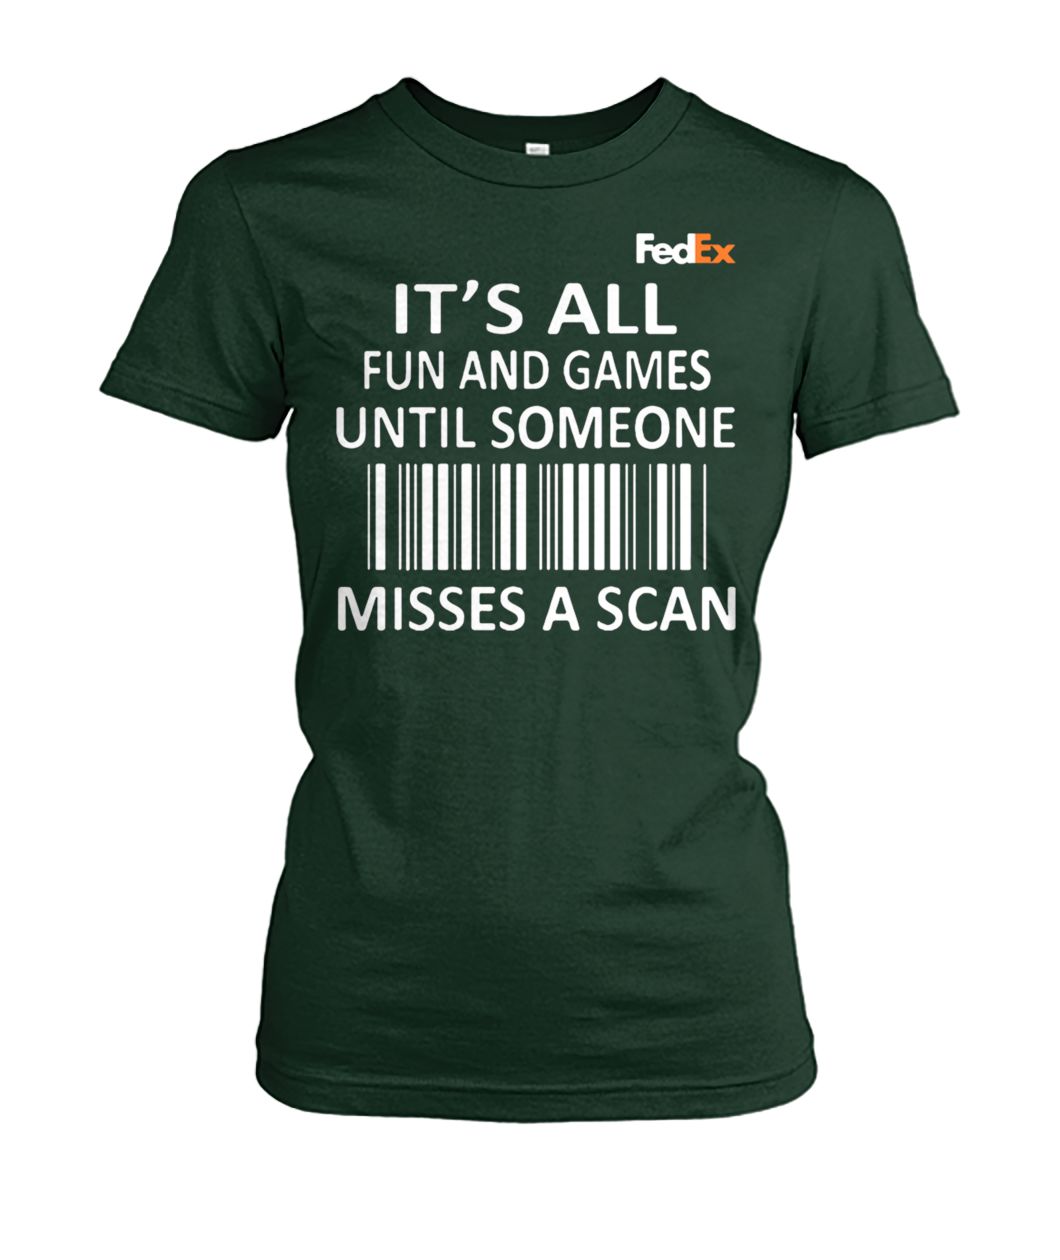 FedEx it’s all fun and games until someone misses a scan women's crew tee